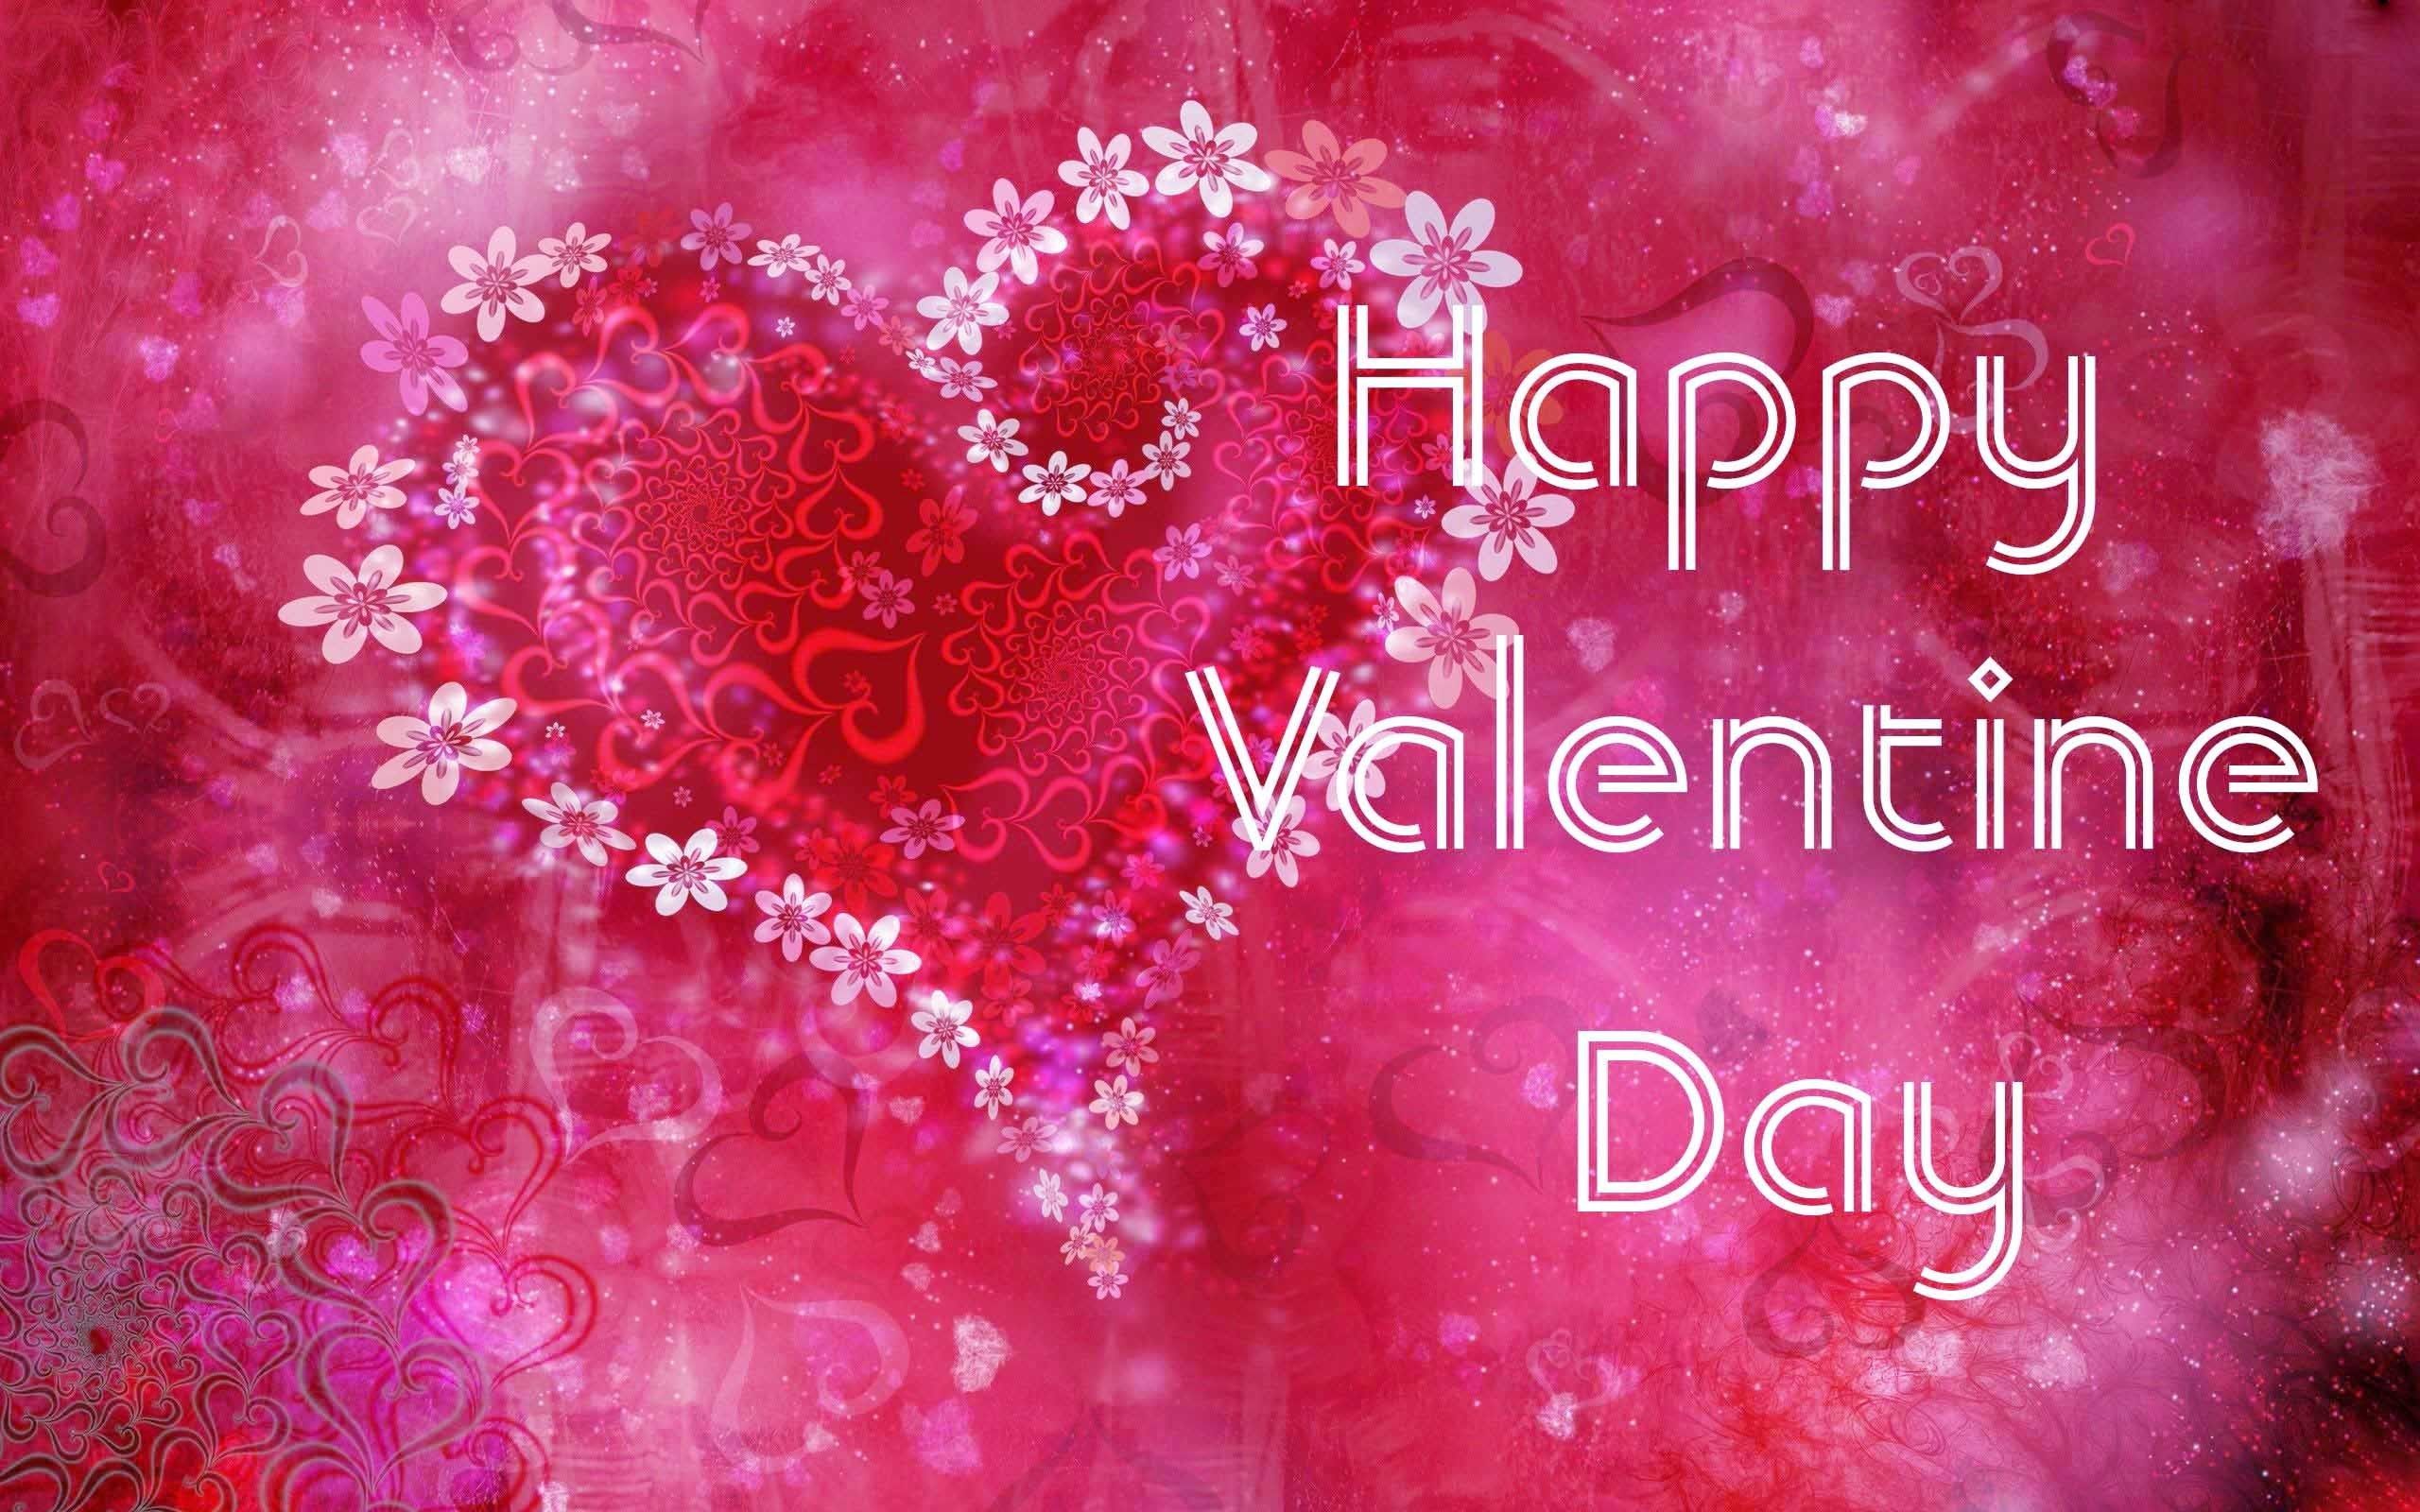 Happy Valentine's Day Cute Wallpapers - Wallpaper Cave